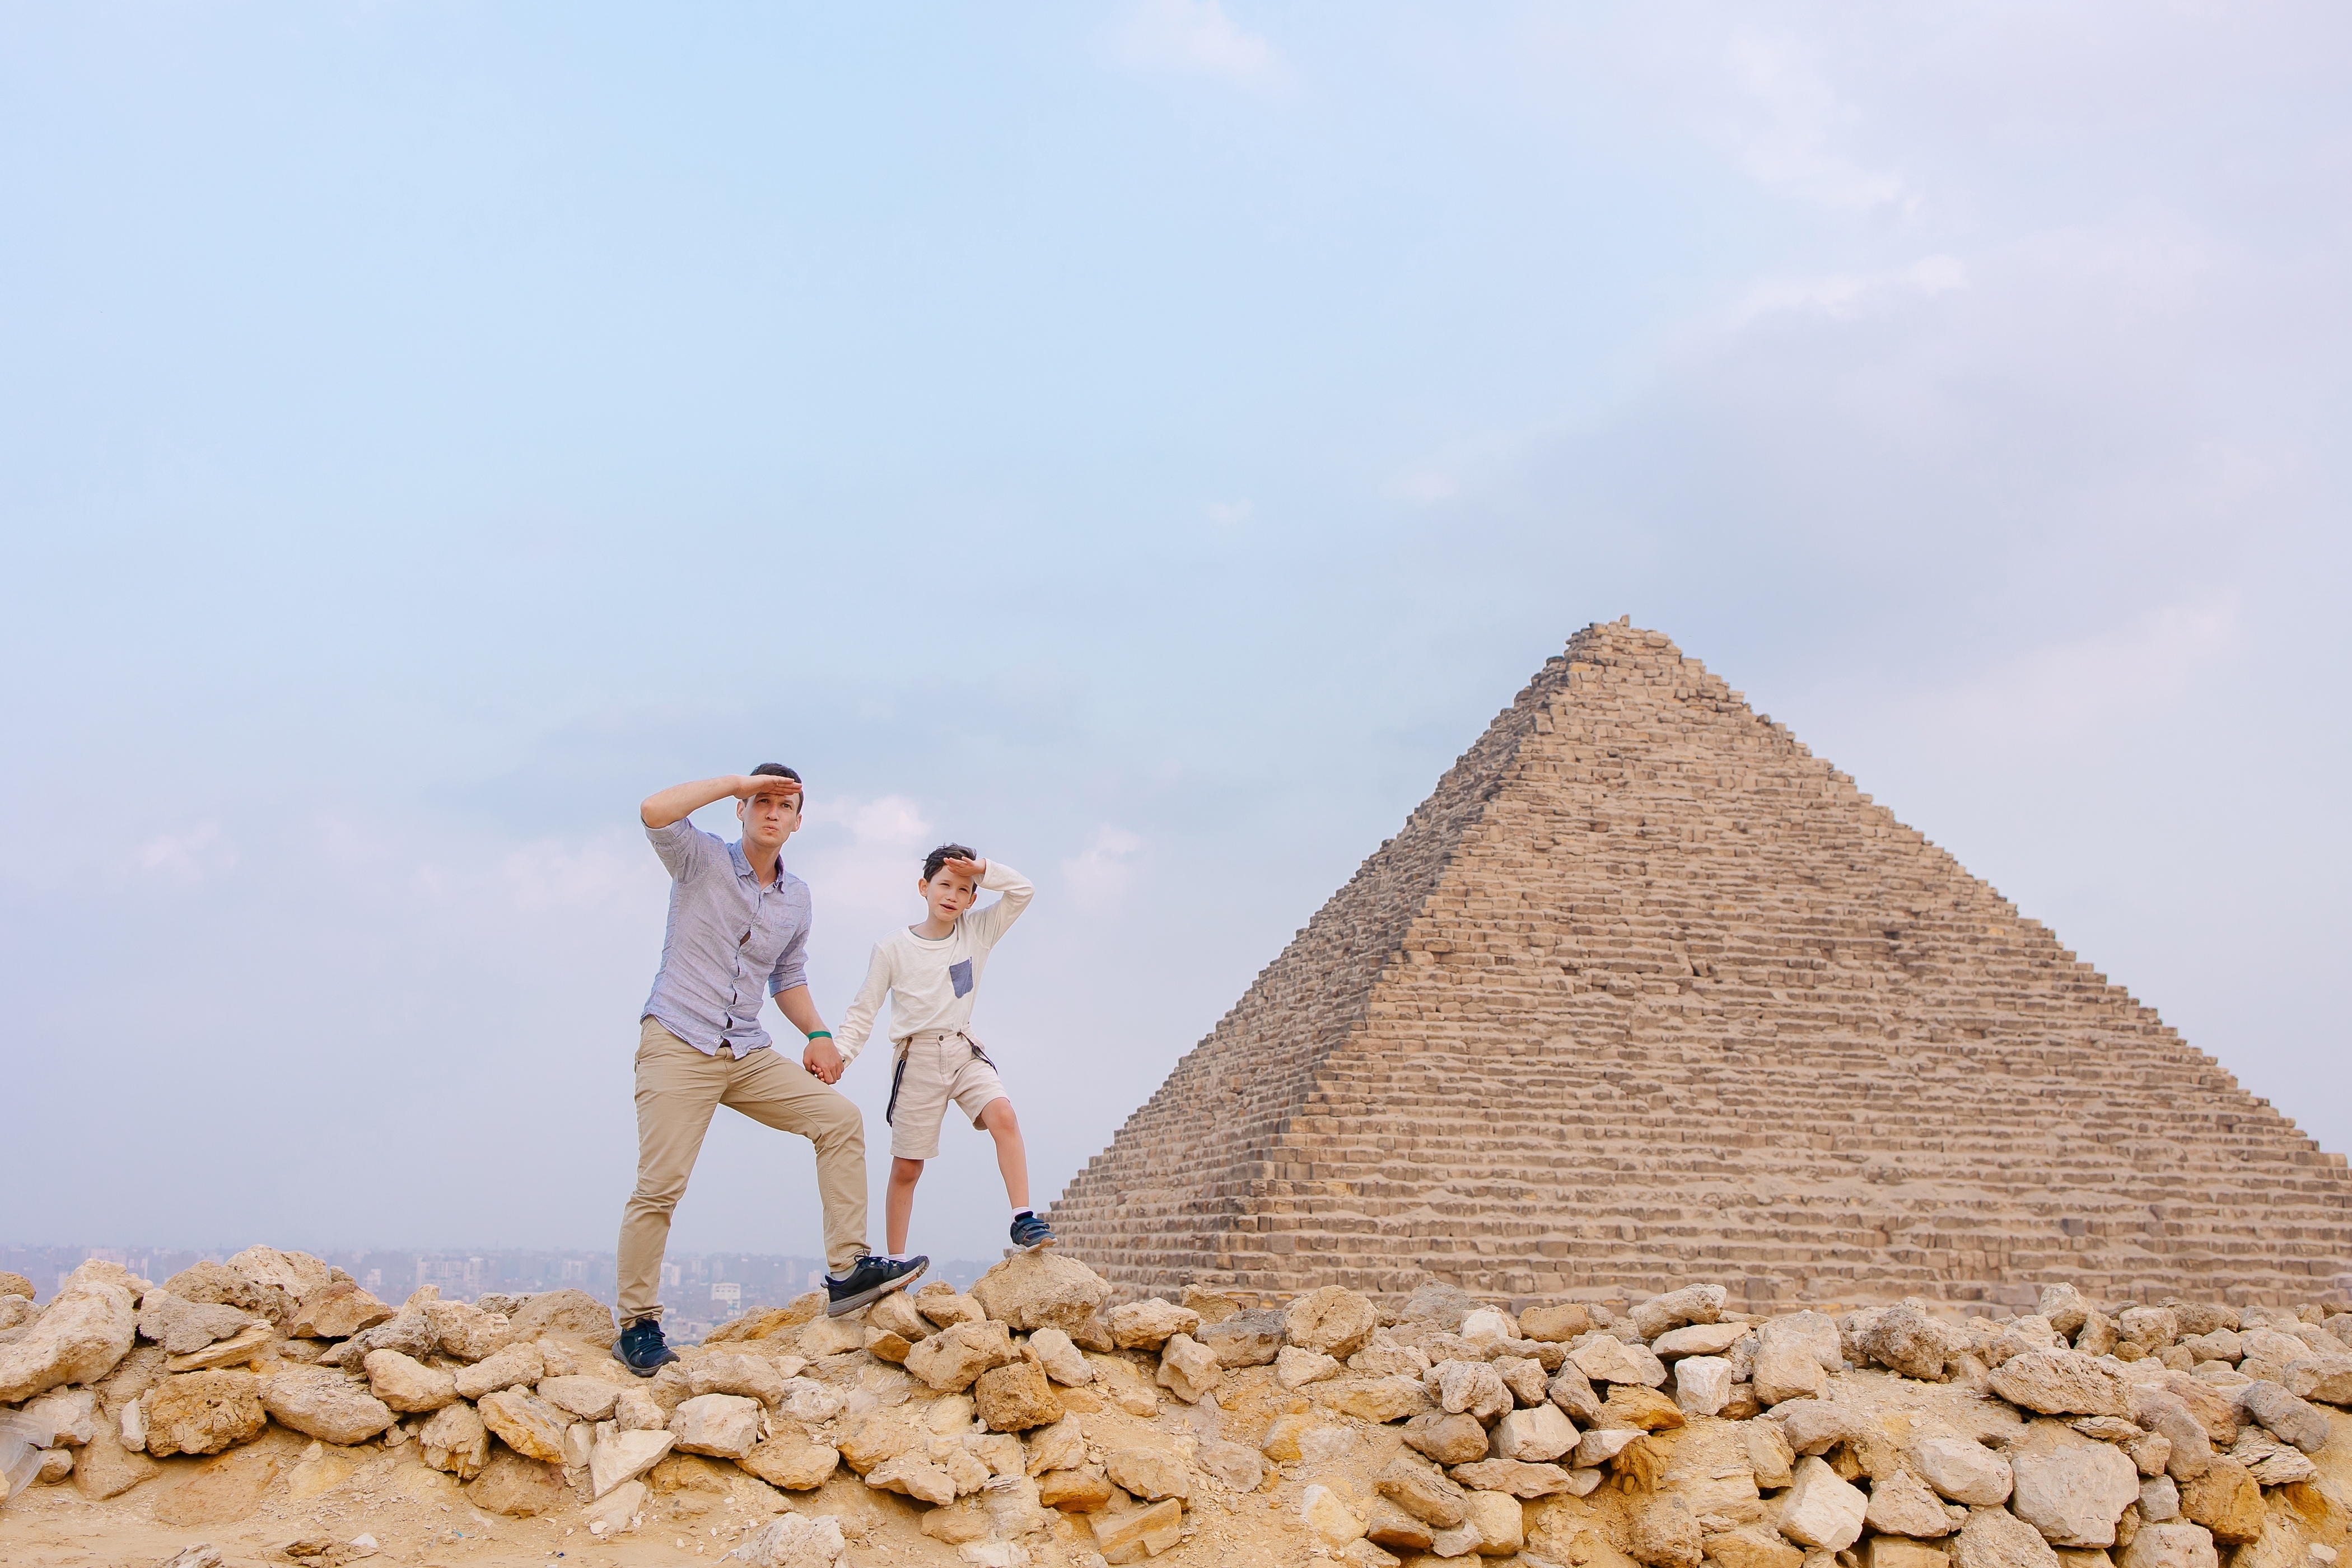 Father and child together in front of the pyramids in Cairo.